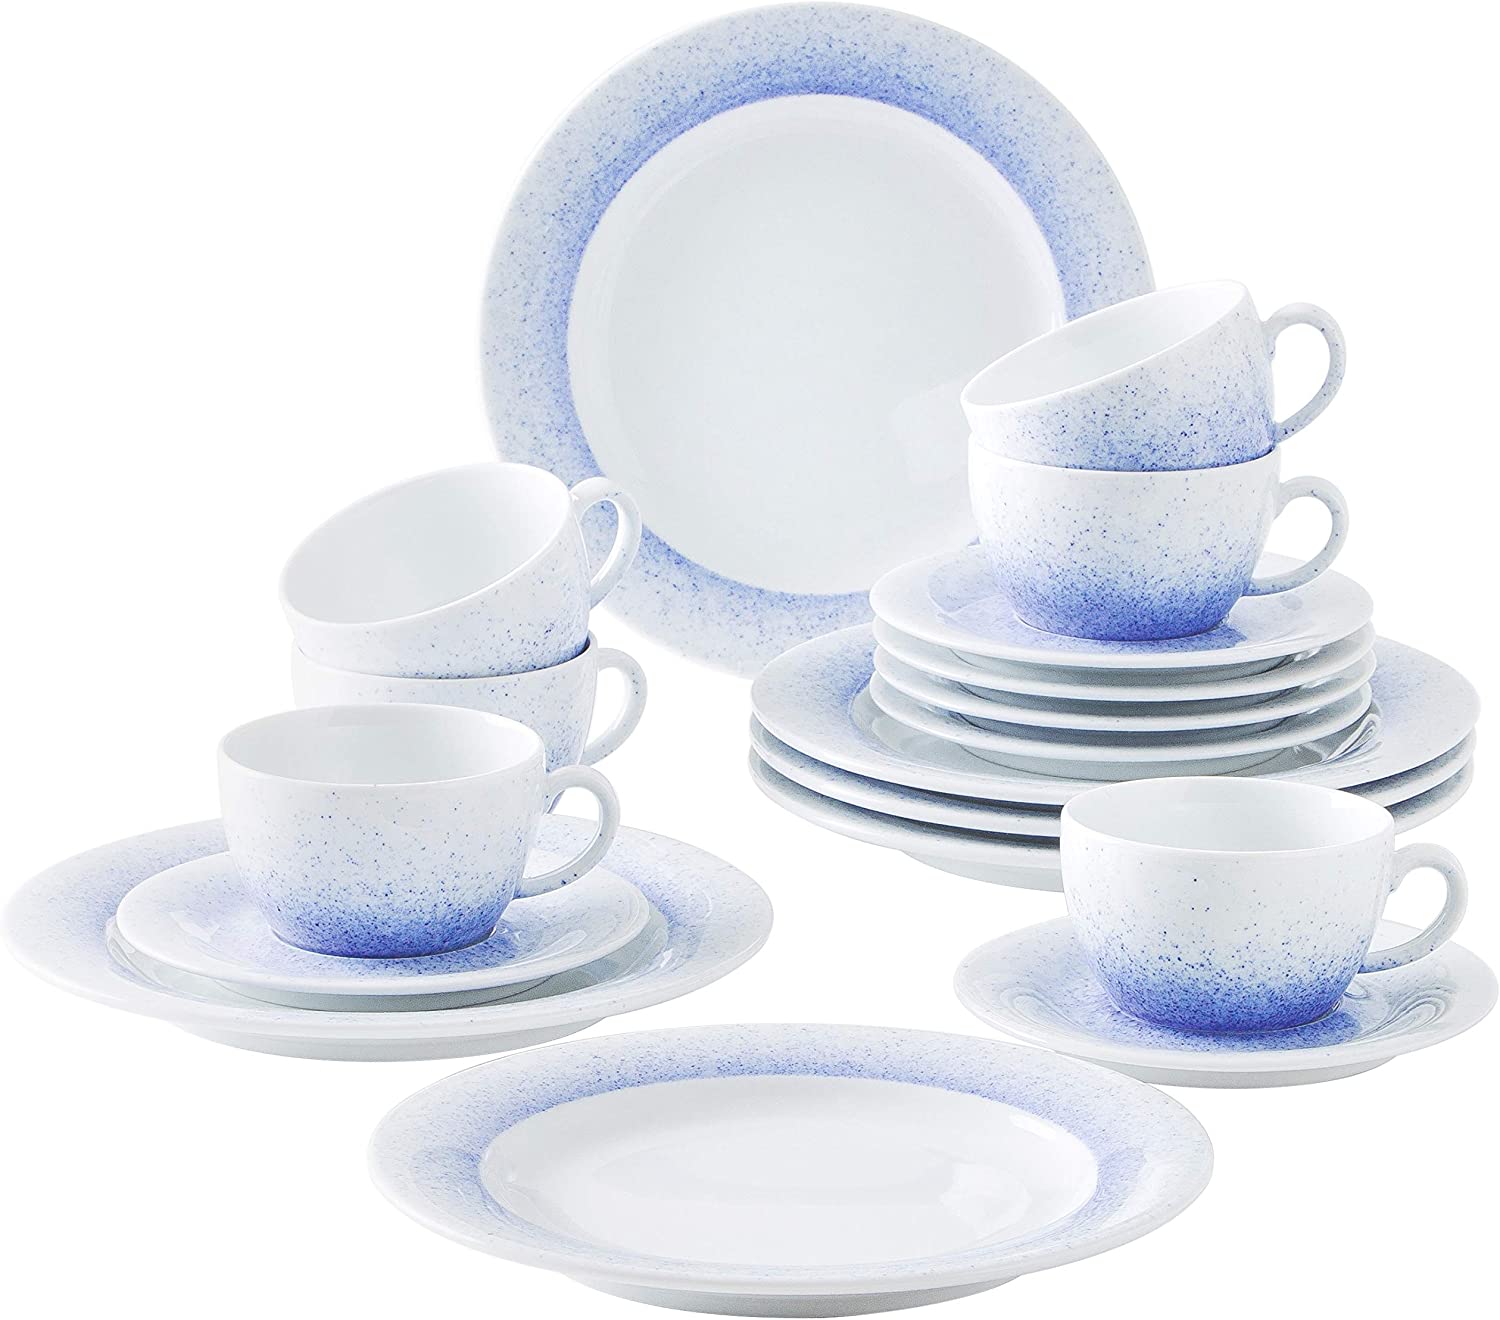 Kahla 630190O75005C Dinner Service Plate Set for 6 People White Blue Plate Round 12-Piece Soup Plate 25 cm Large Dinner Plate 28 cm